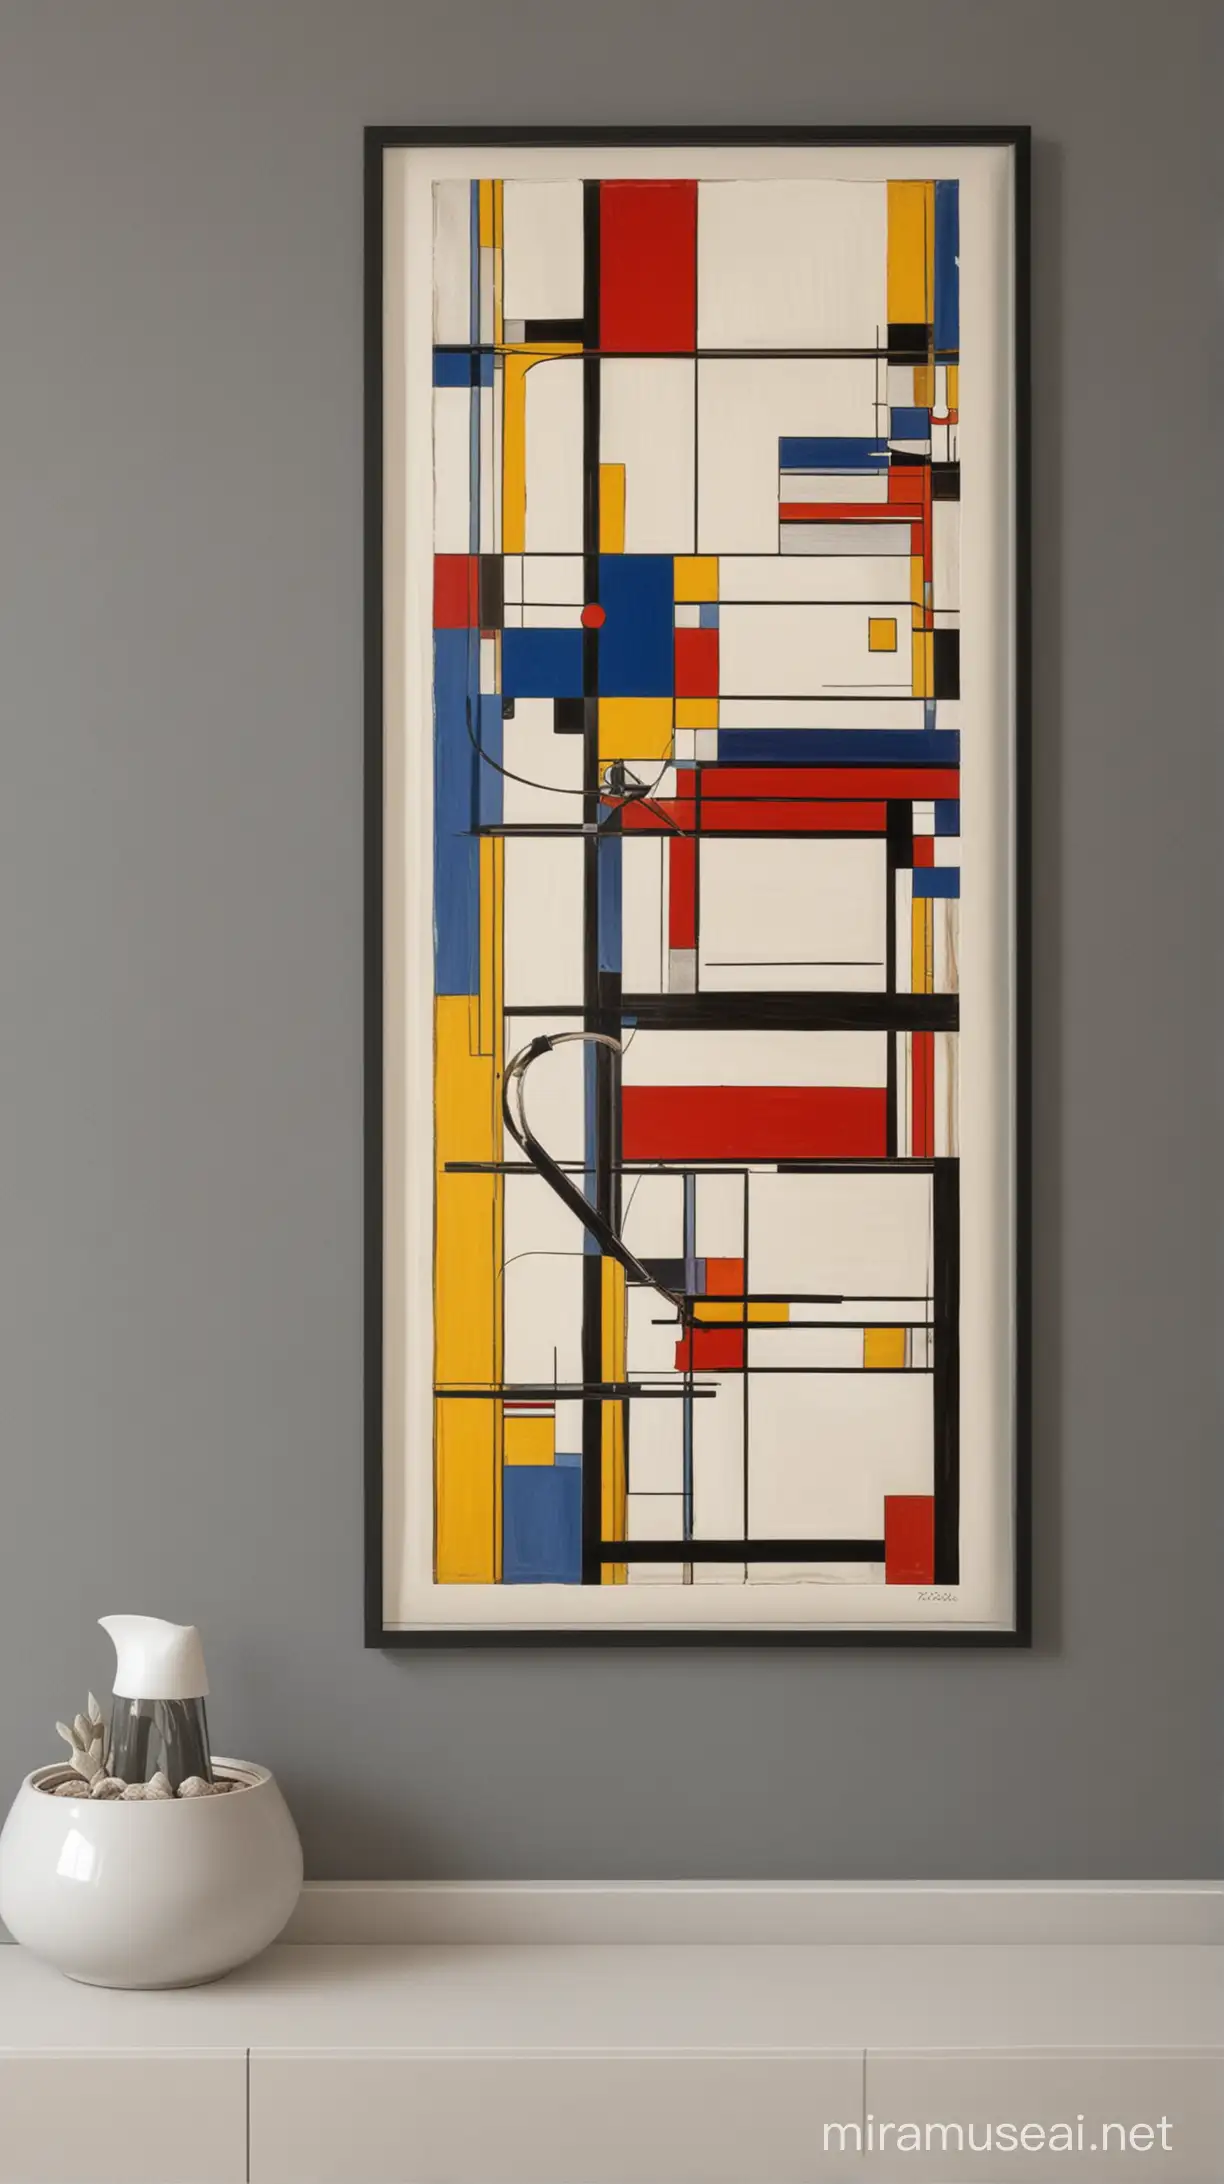 Combining the works of Piet Mondrian and Kandinsky in a 30 x 90 frame